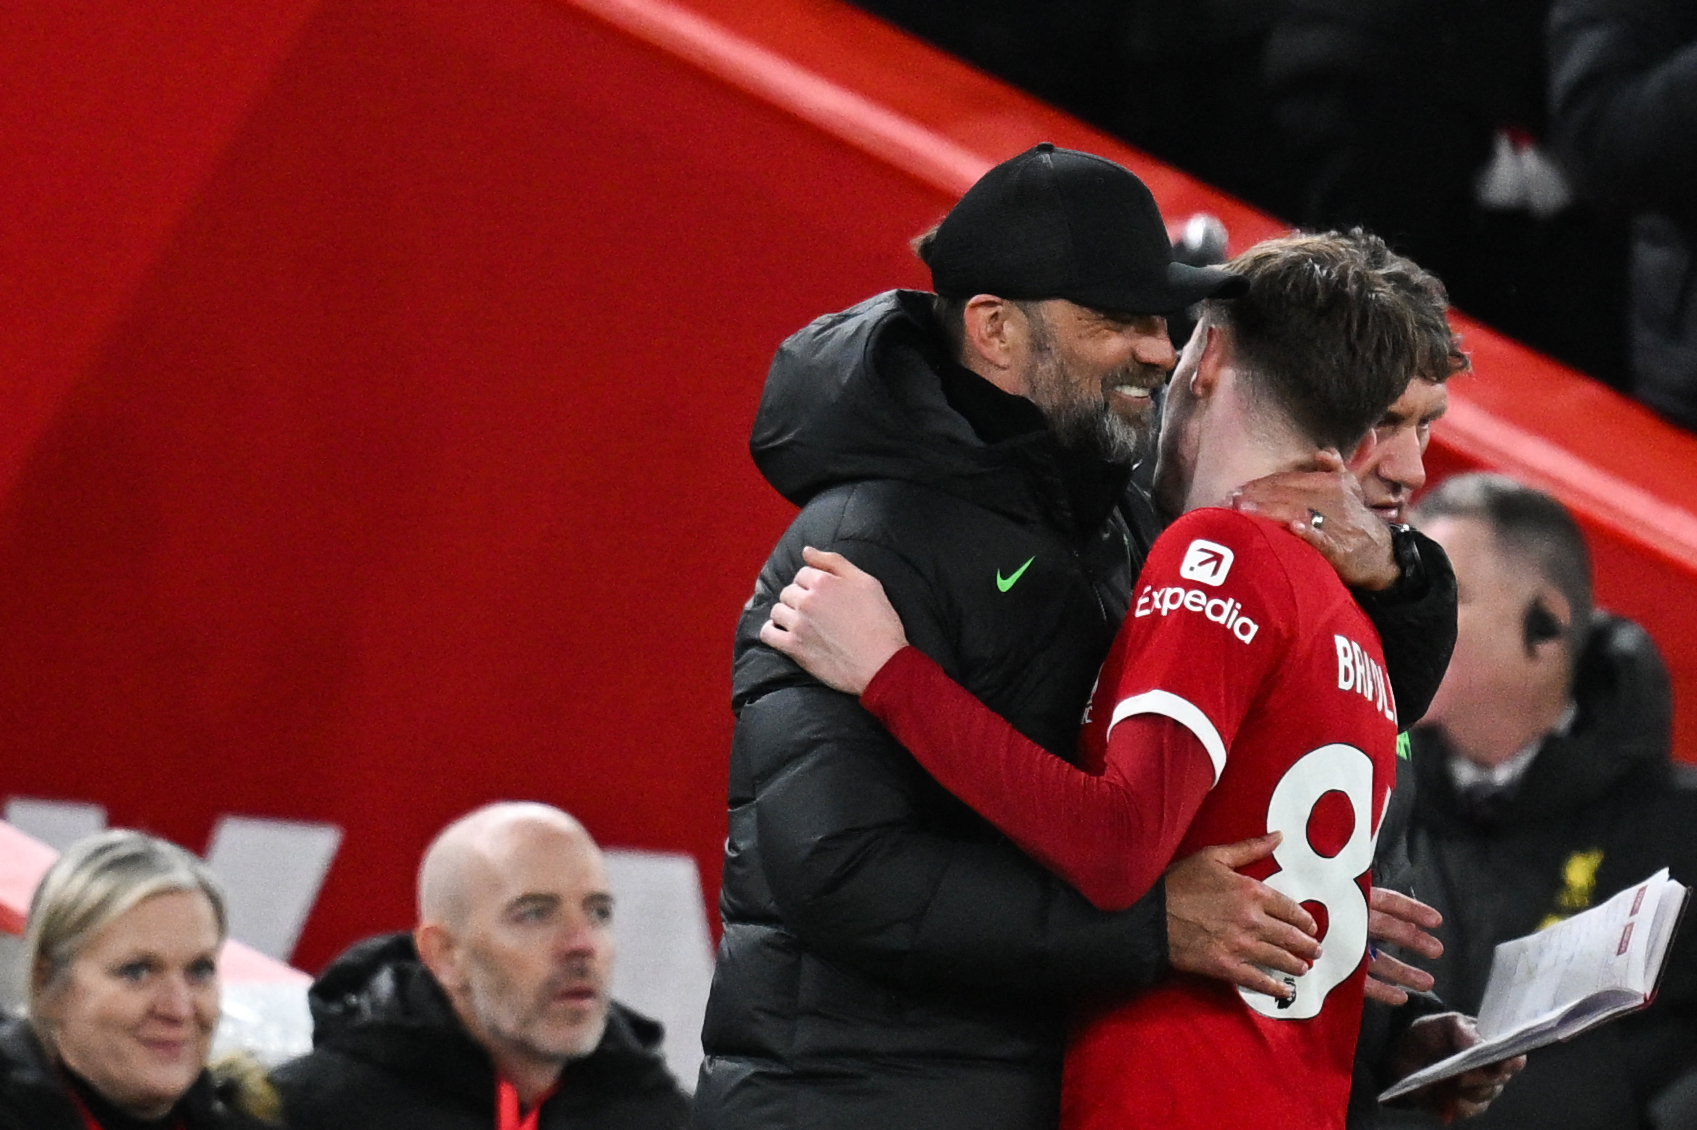 Liverpool boss Jurgen Klopp has made a strong title prediction as the Reds travel to the Emirate Stadium to face Arsenal in Sunday's Premier League encounter.